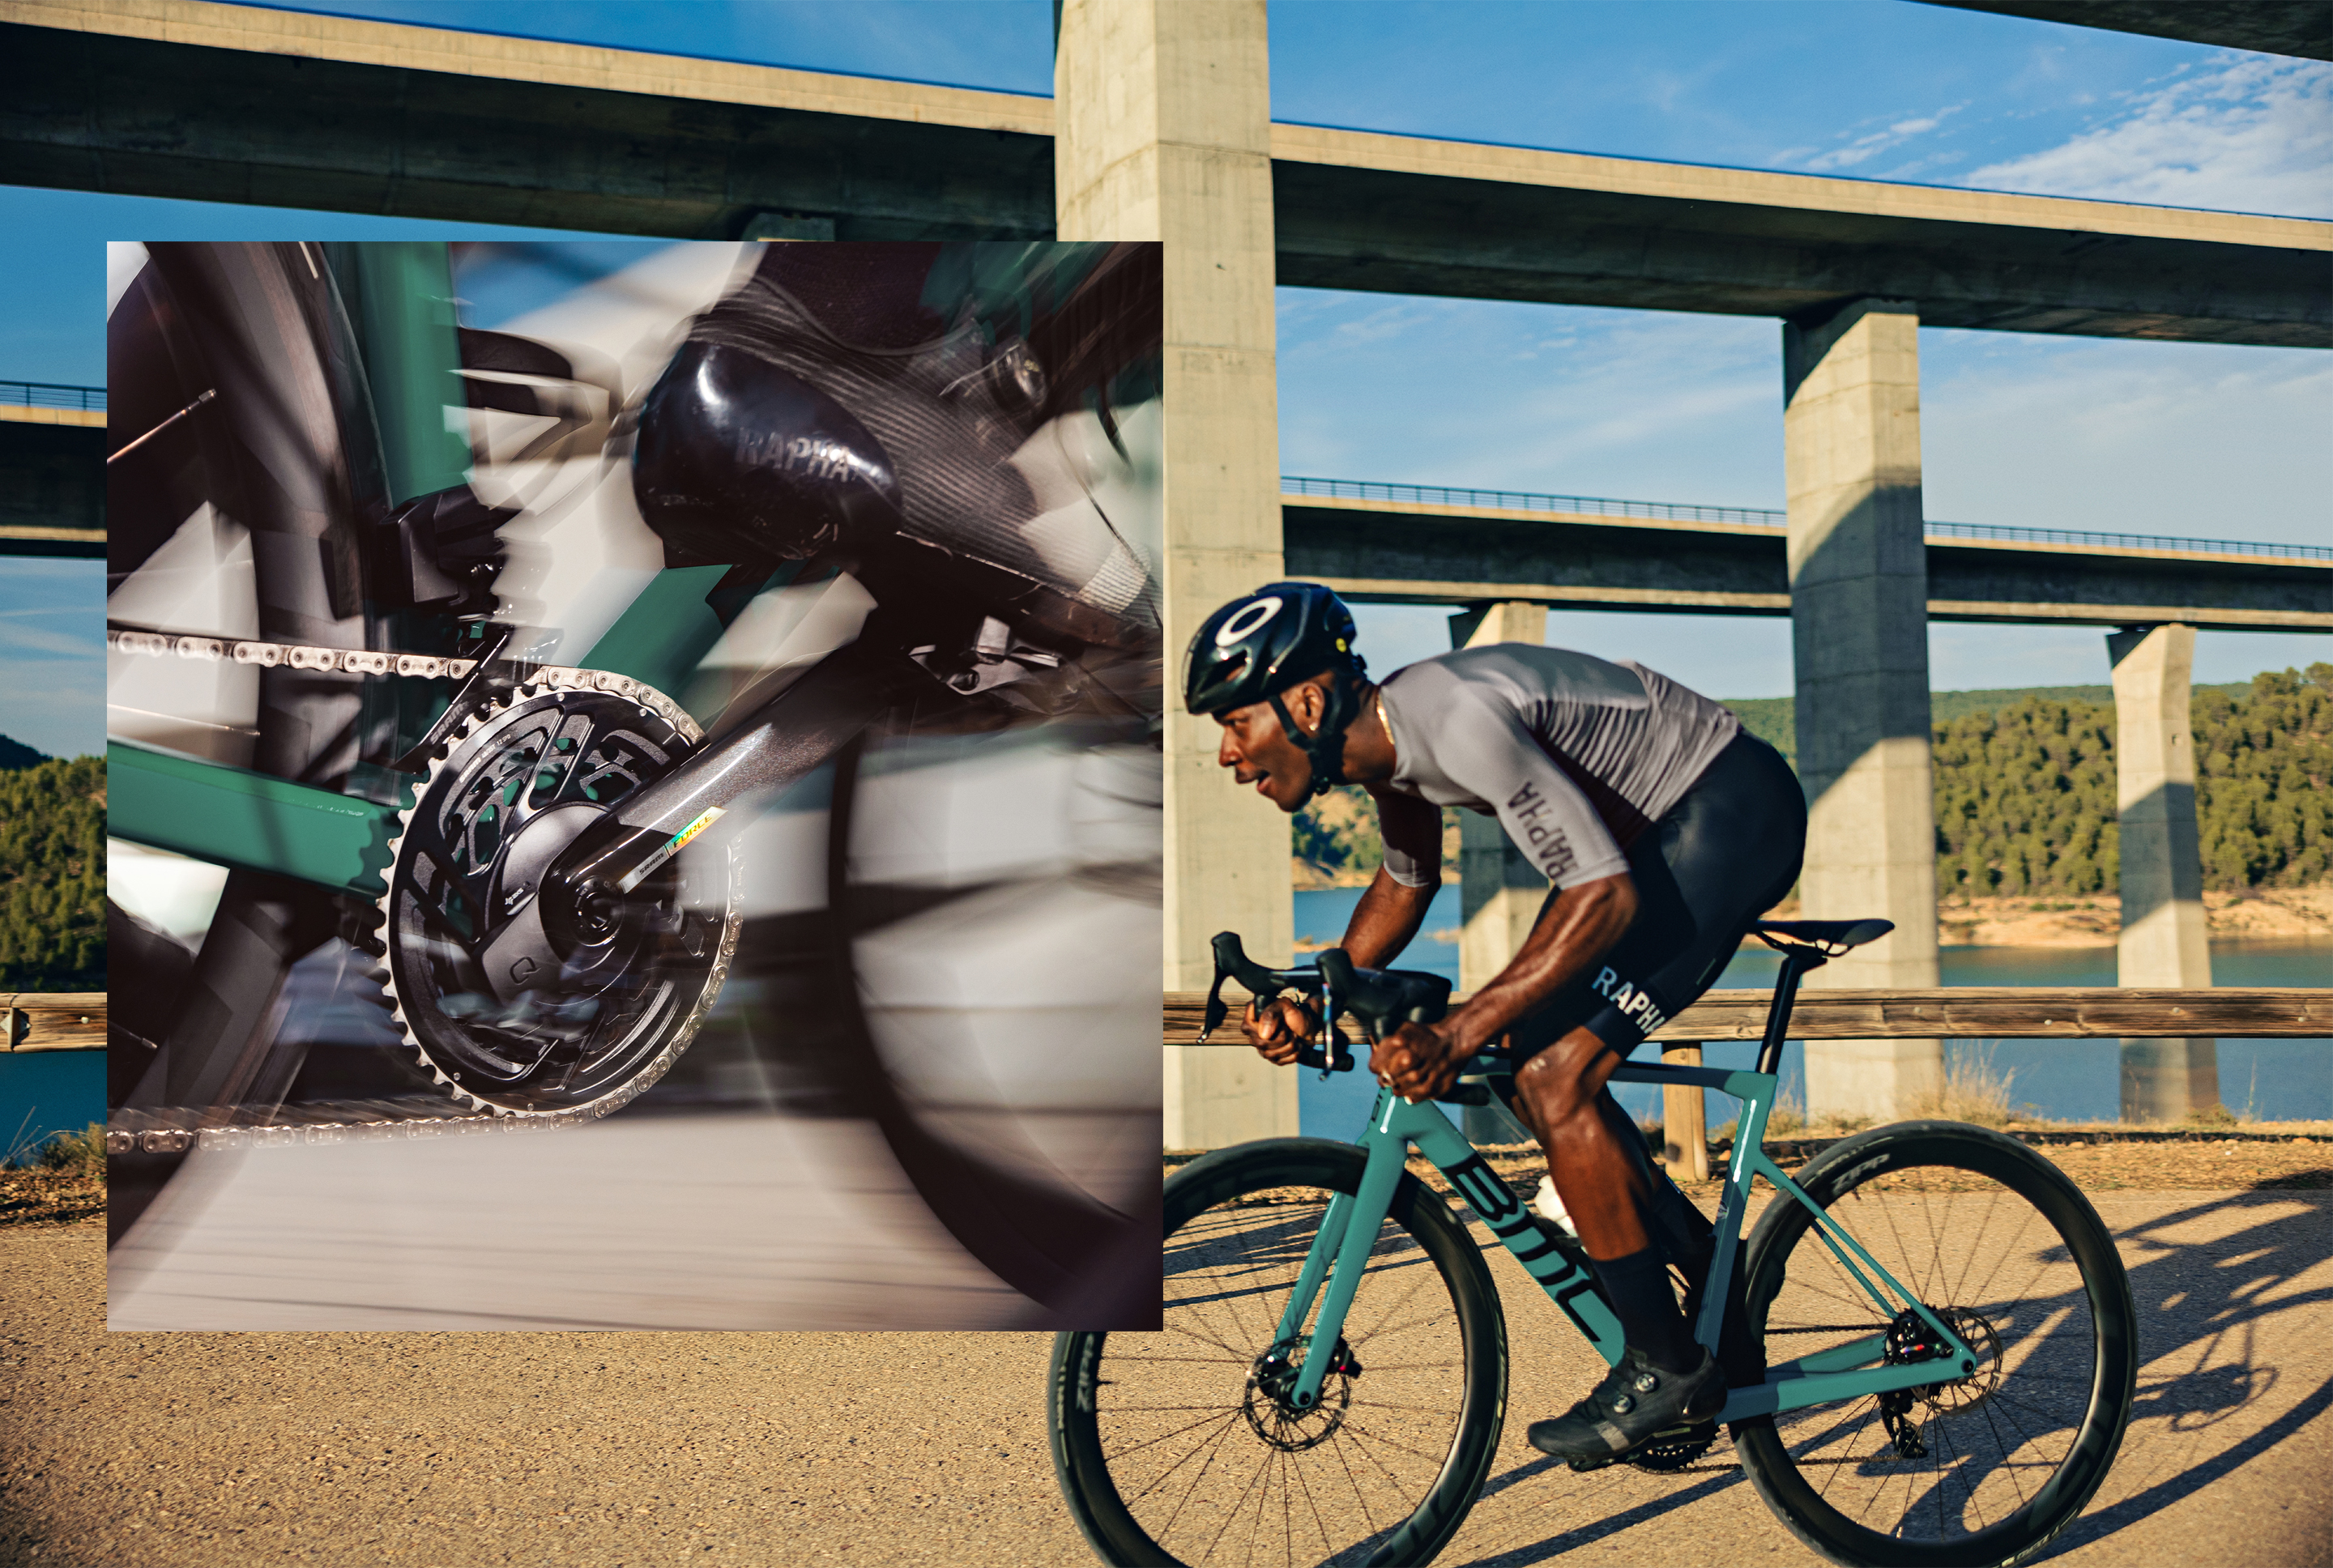 Measure your power while sprinting with a Force AXS power meter.